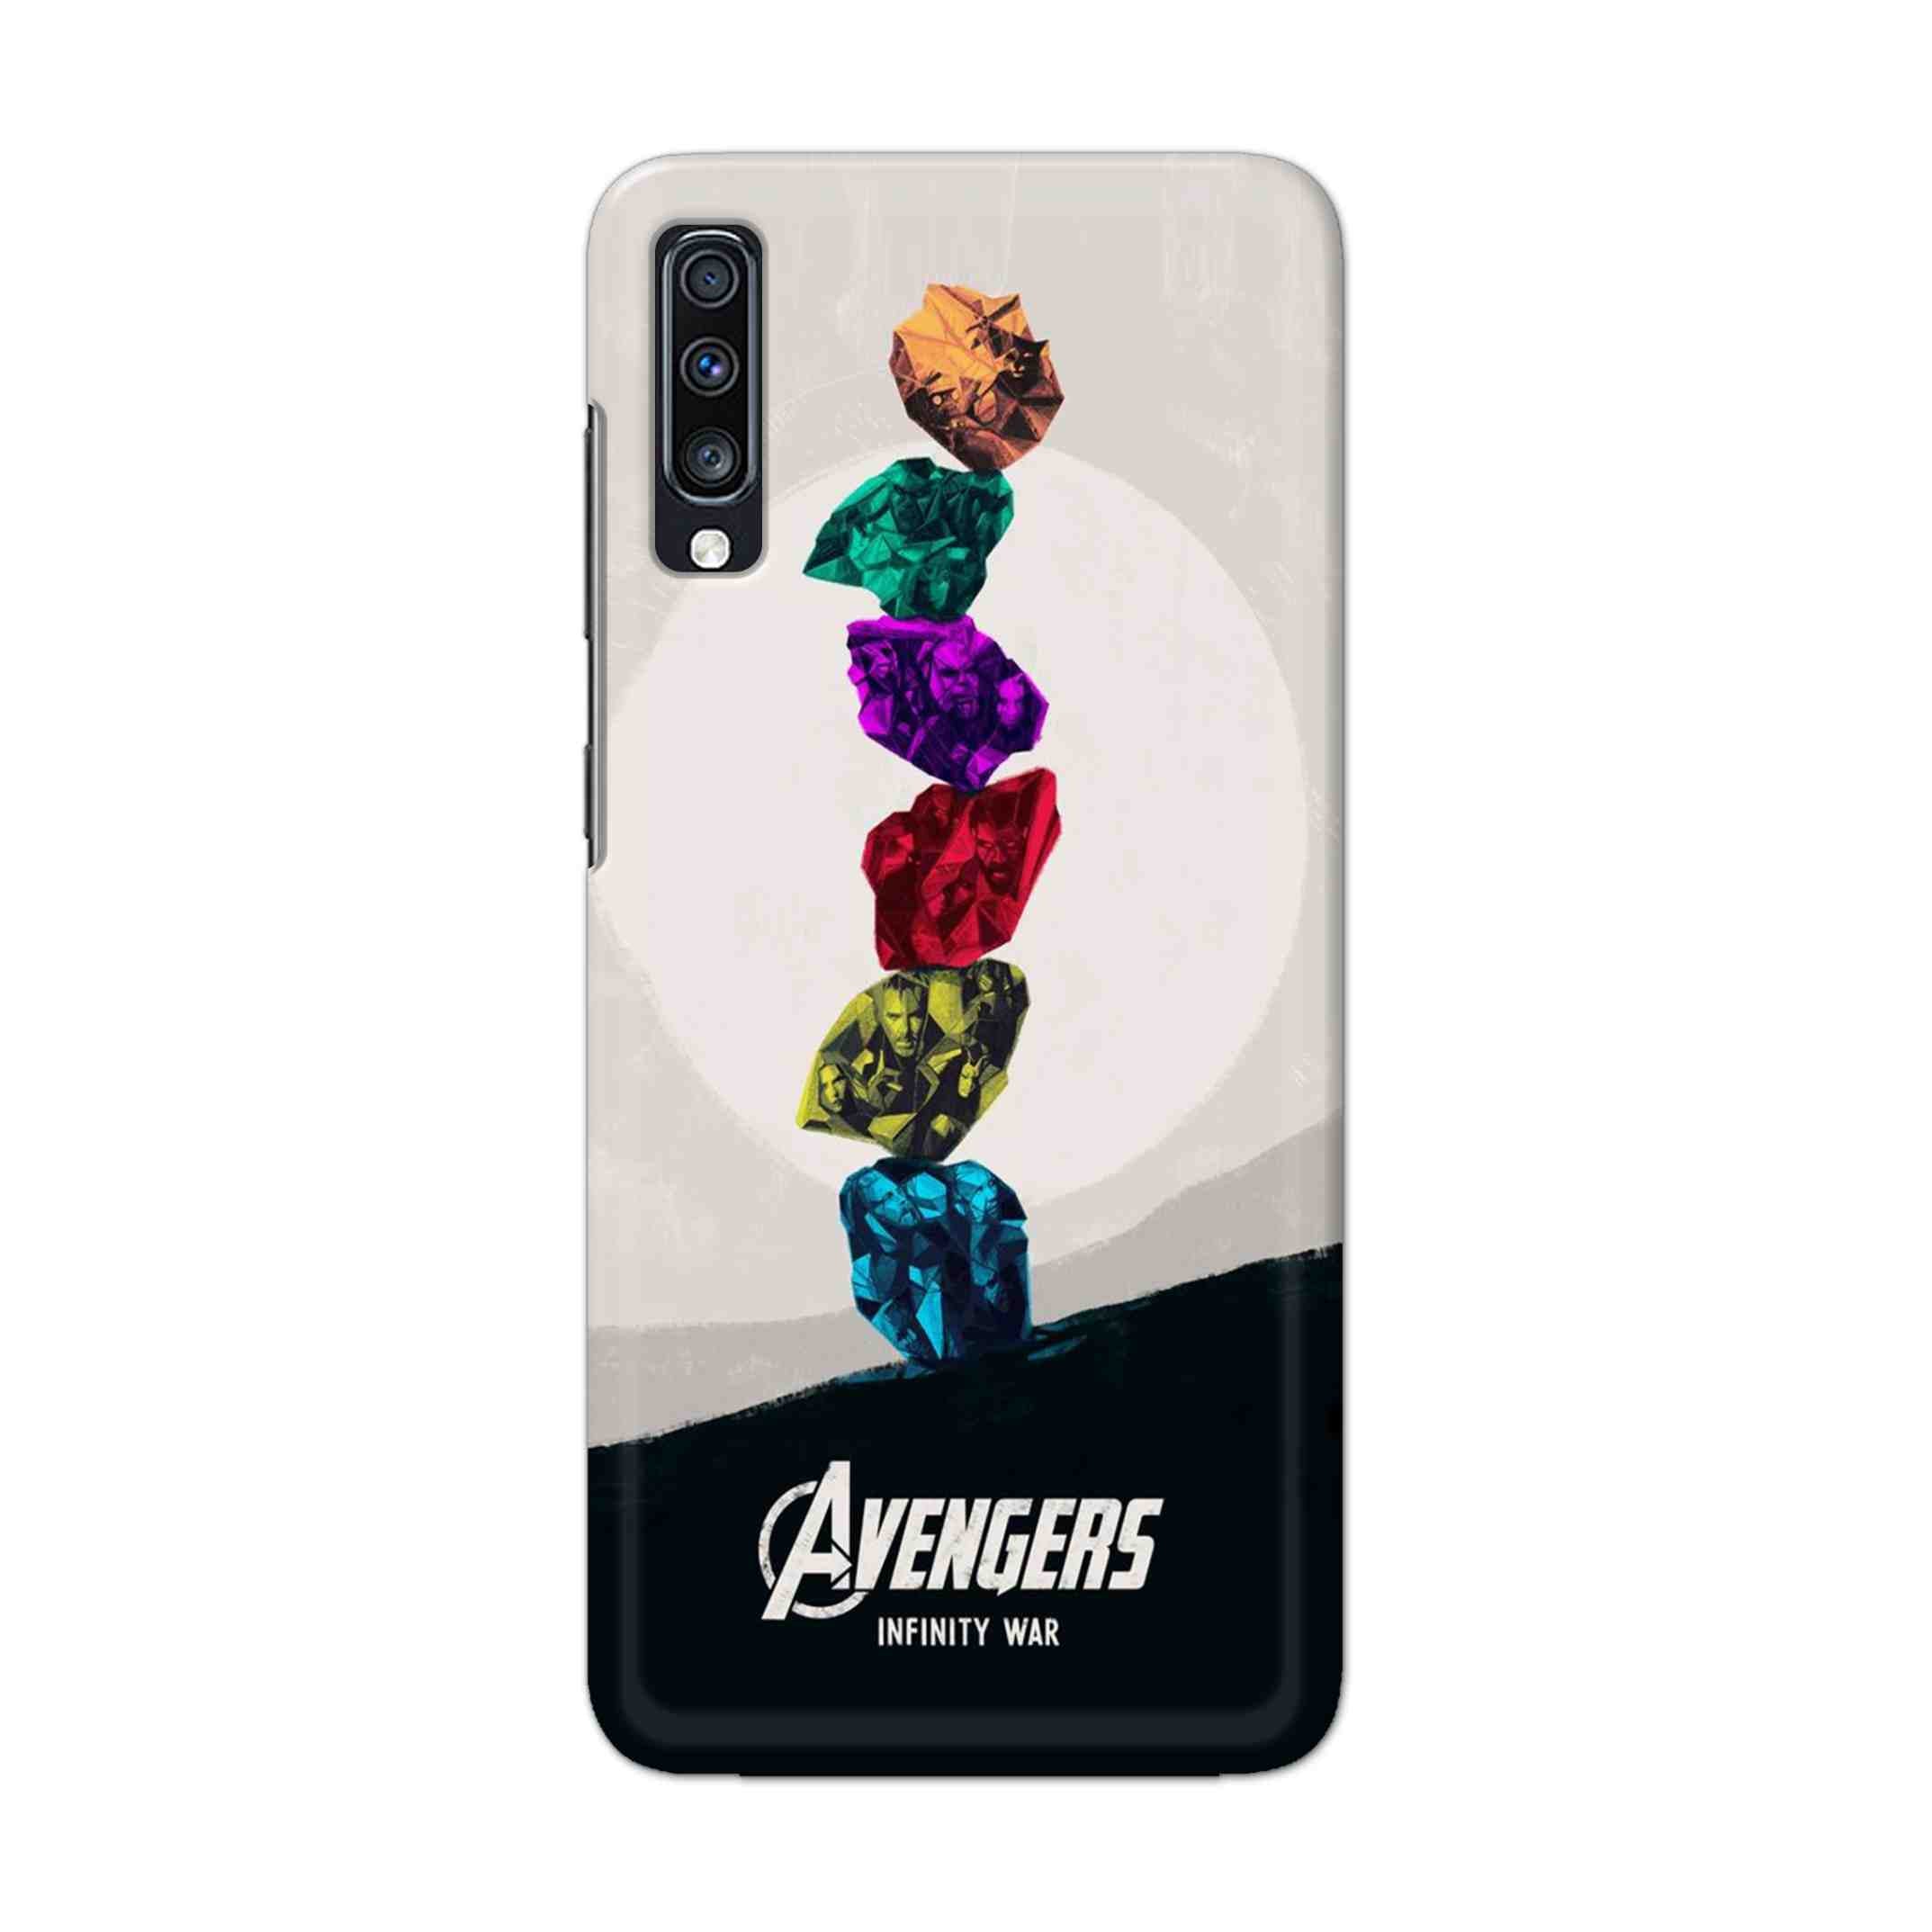 Buy Avengers Stone Hard Back Mobile Phone Case Cover For Samsung Galaxy A70 Online